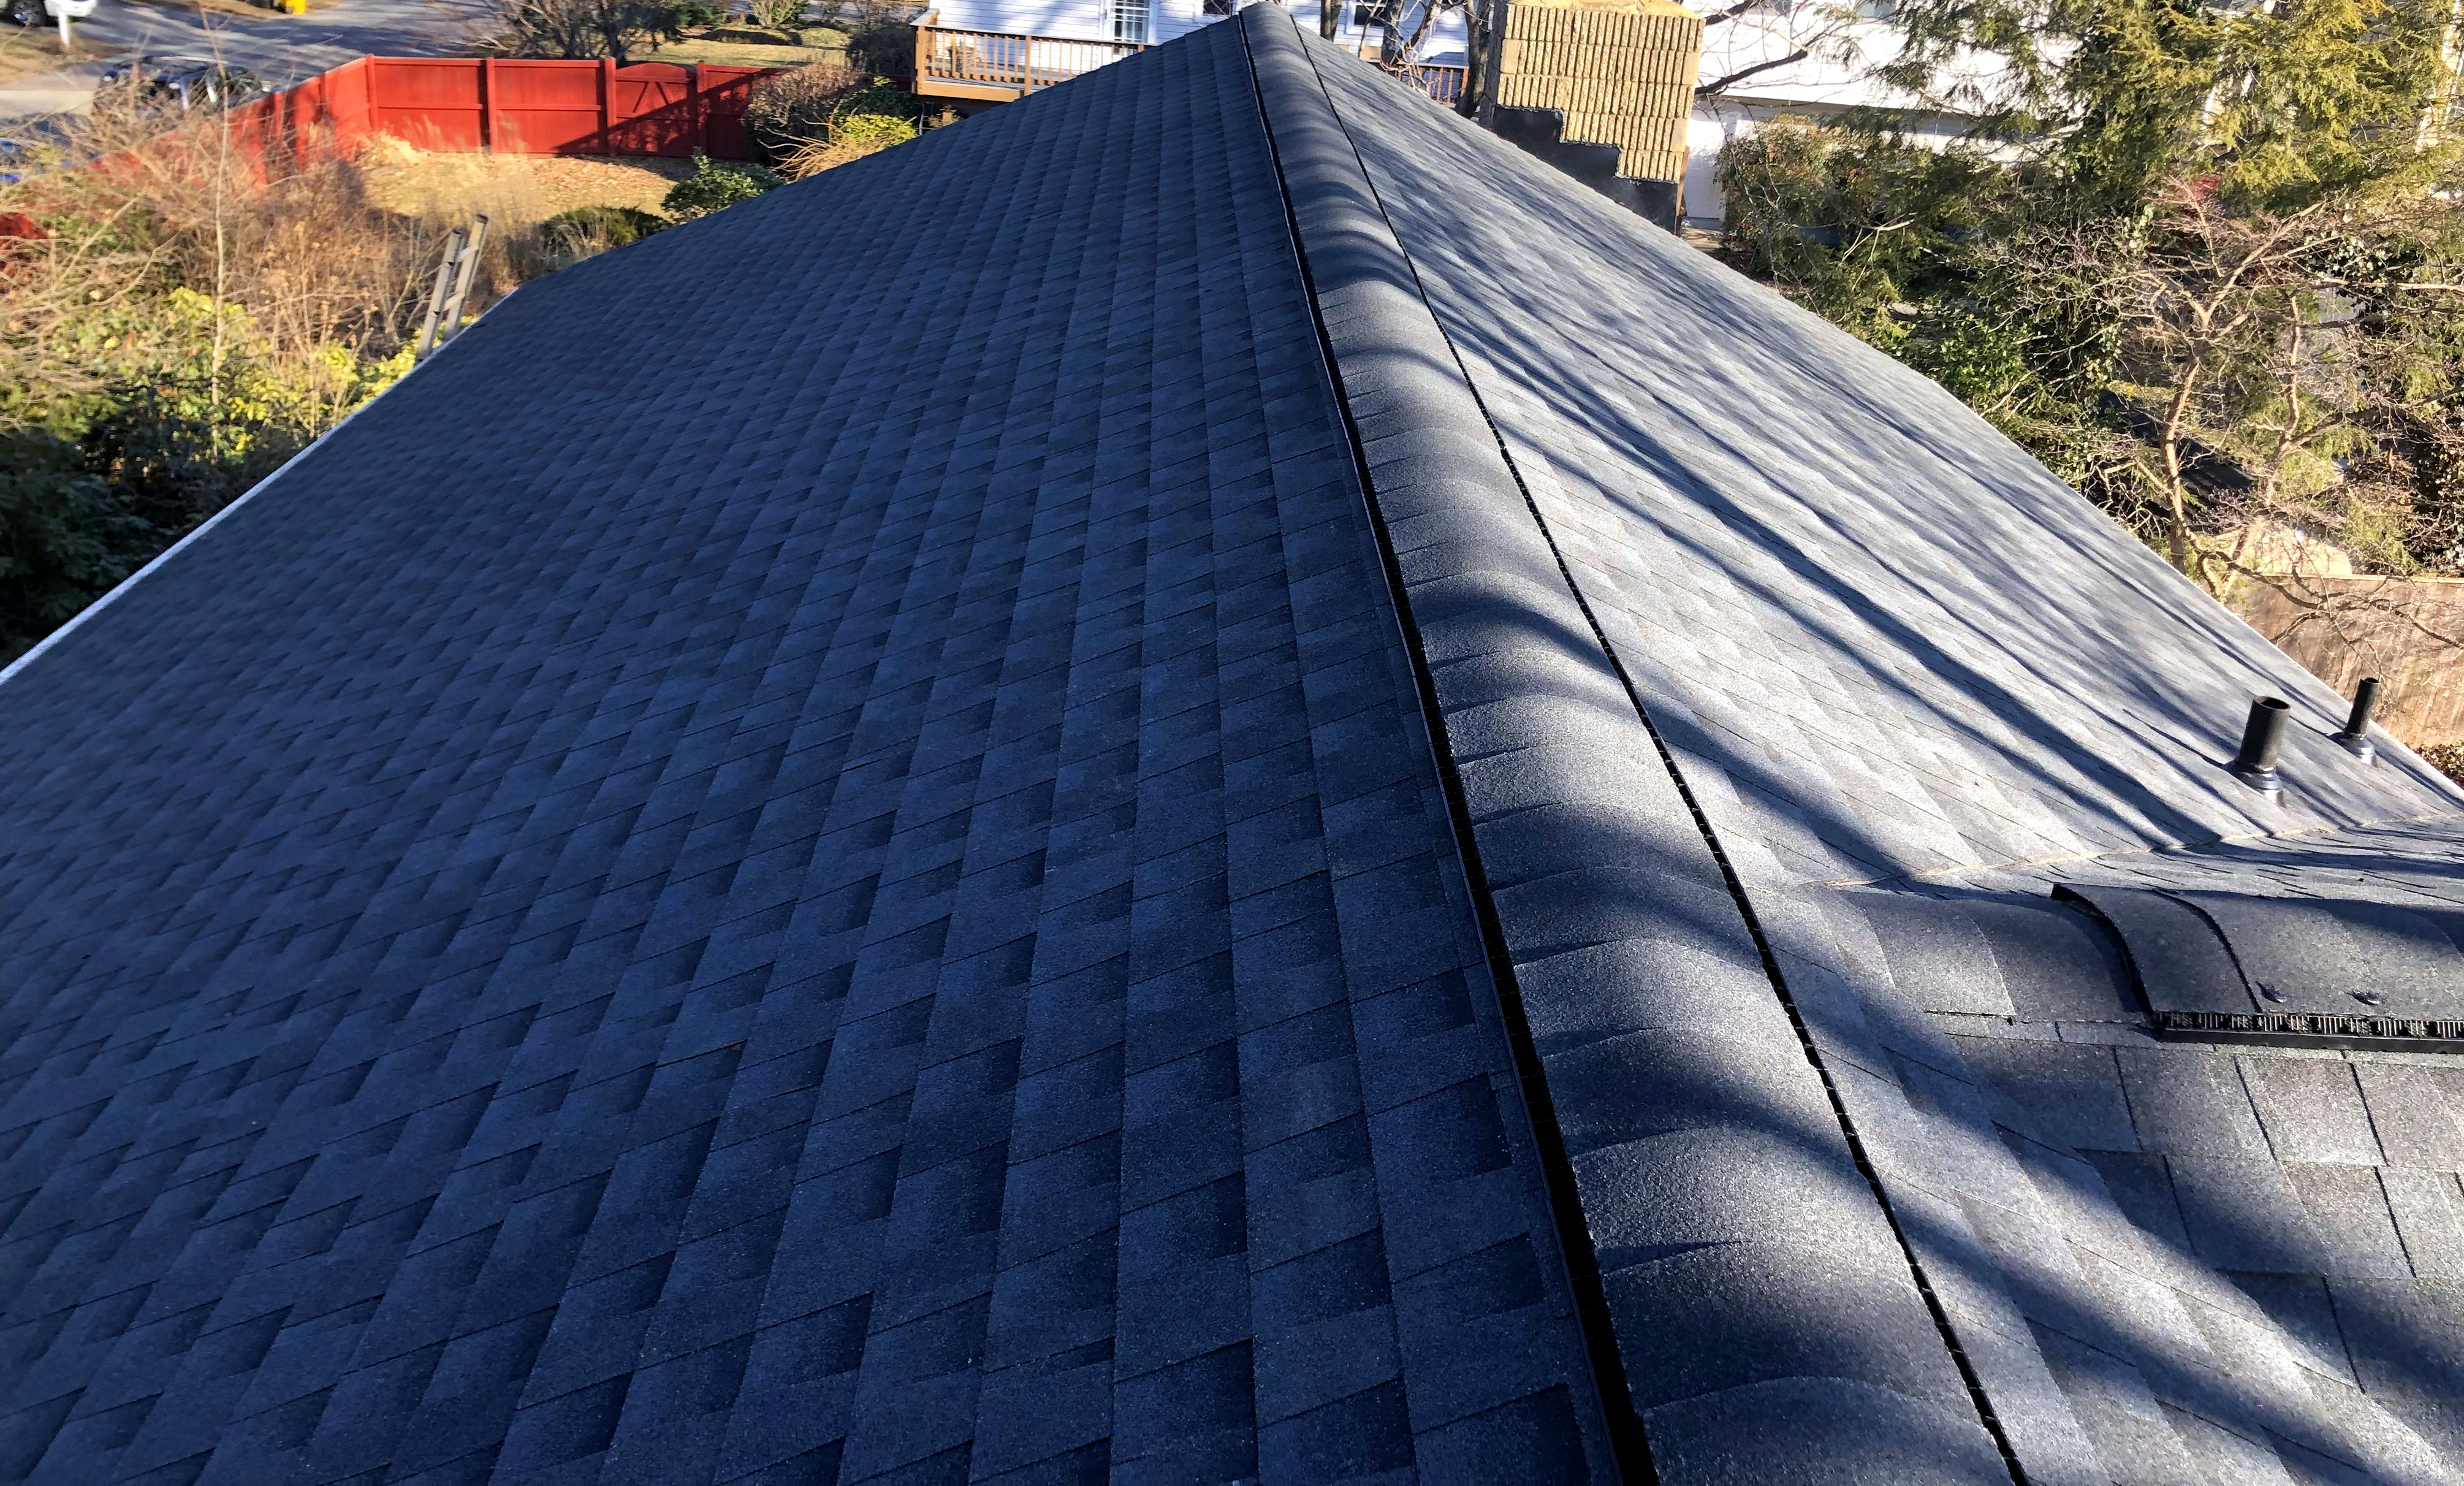 Roofing in Linthicum, MD 21090